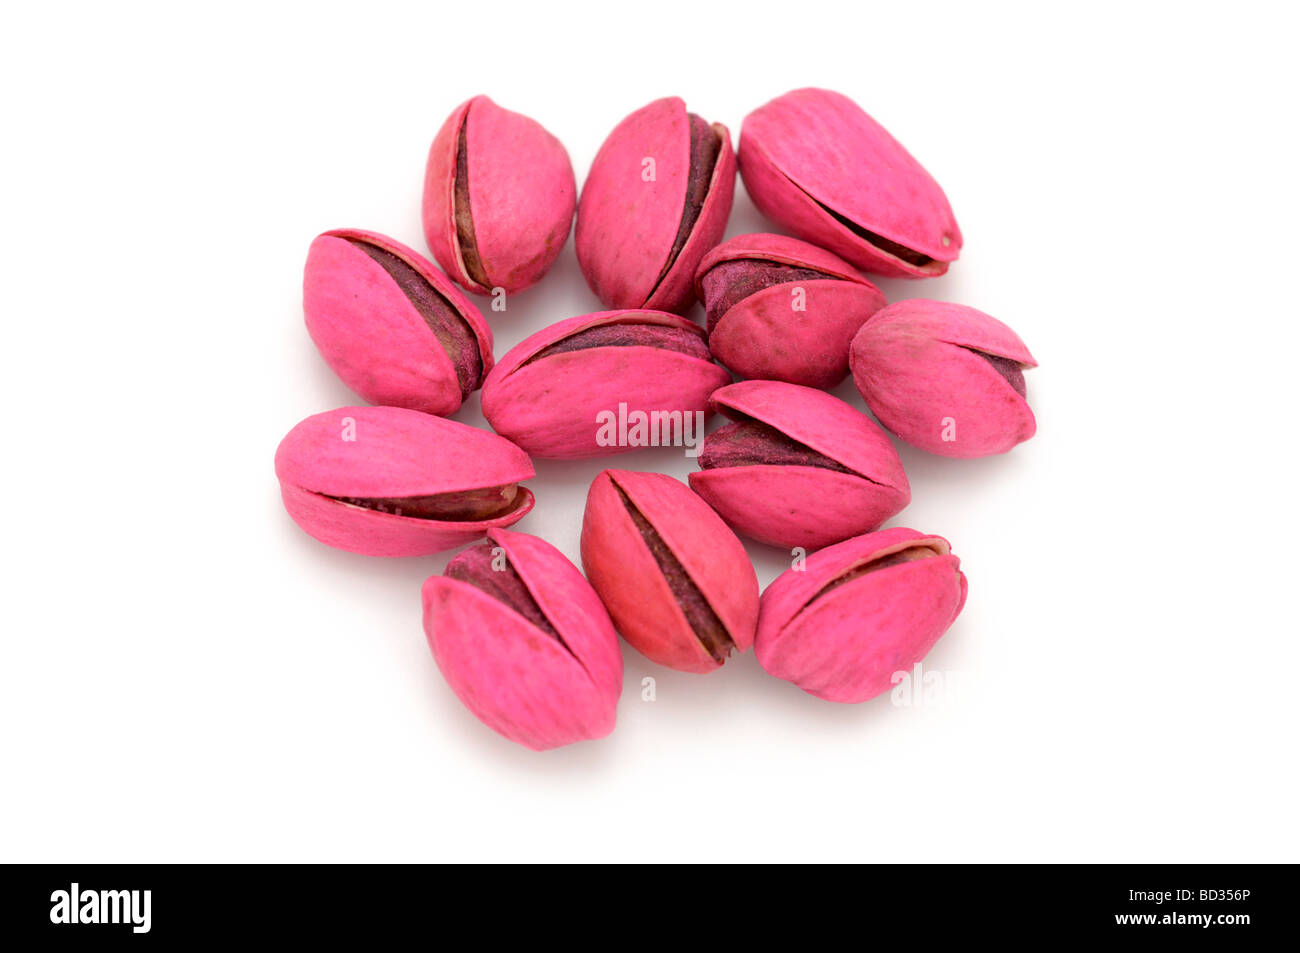 Pink Dyed Pistachio Nuts Stock Photo